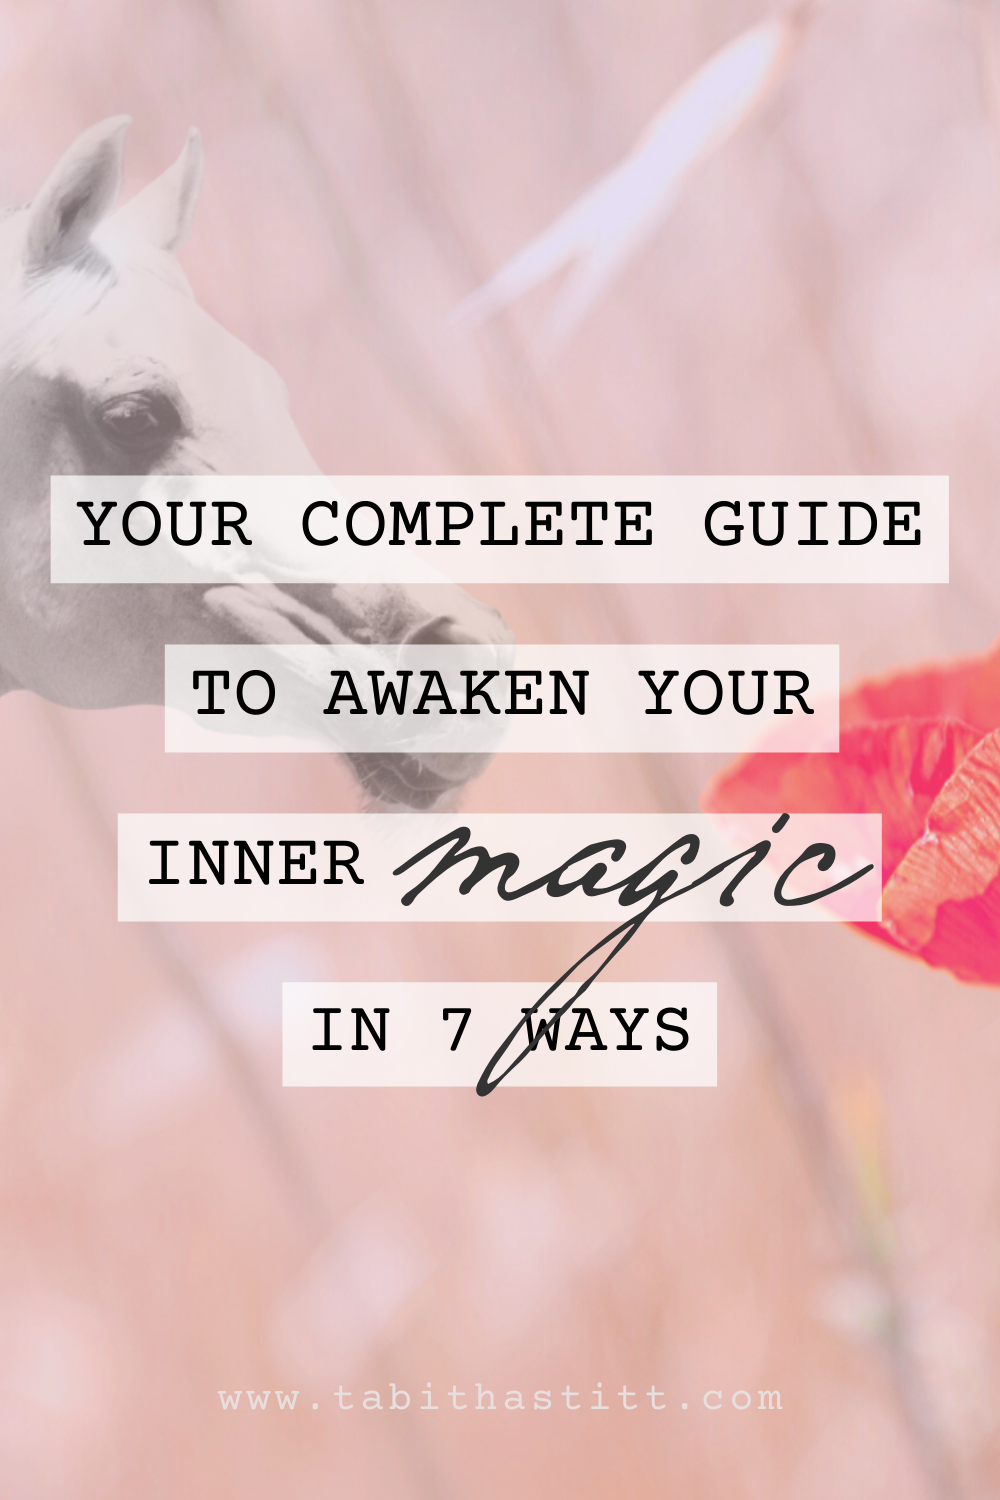 A White Horse Symbolizing Your Complete Guide to Awaken Your Inner Magic in 7 Ways